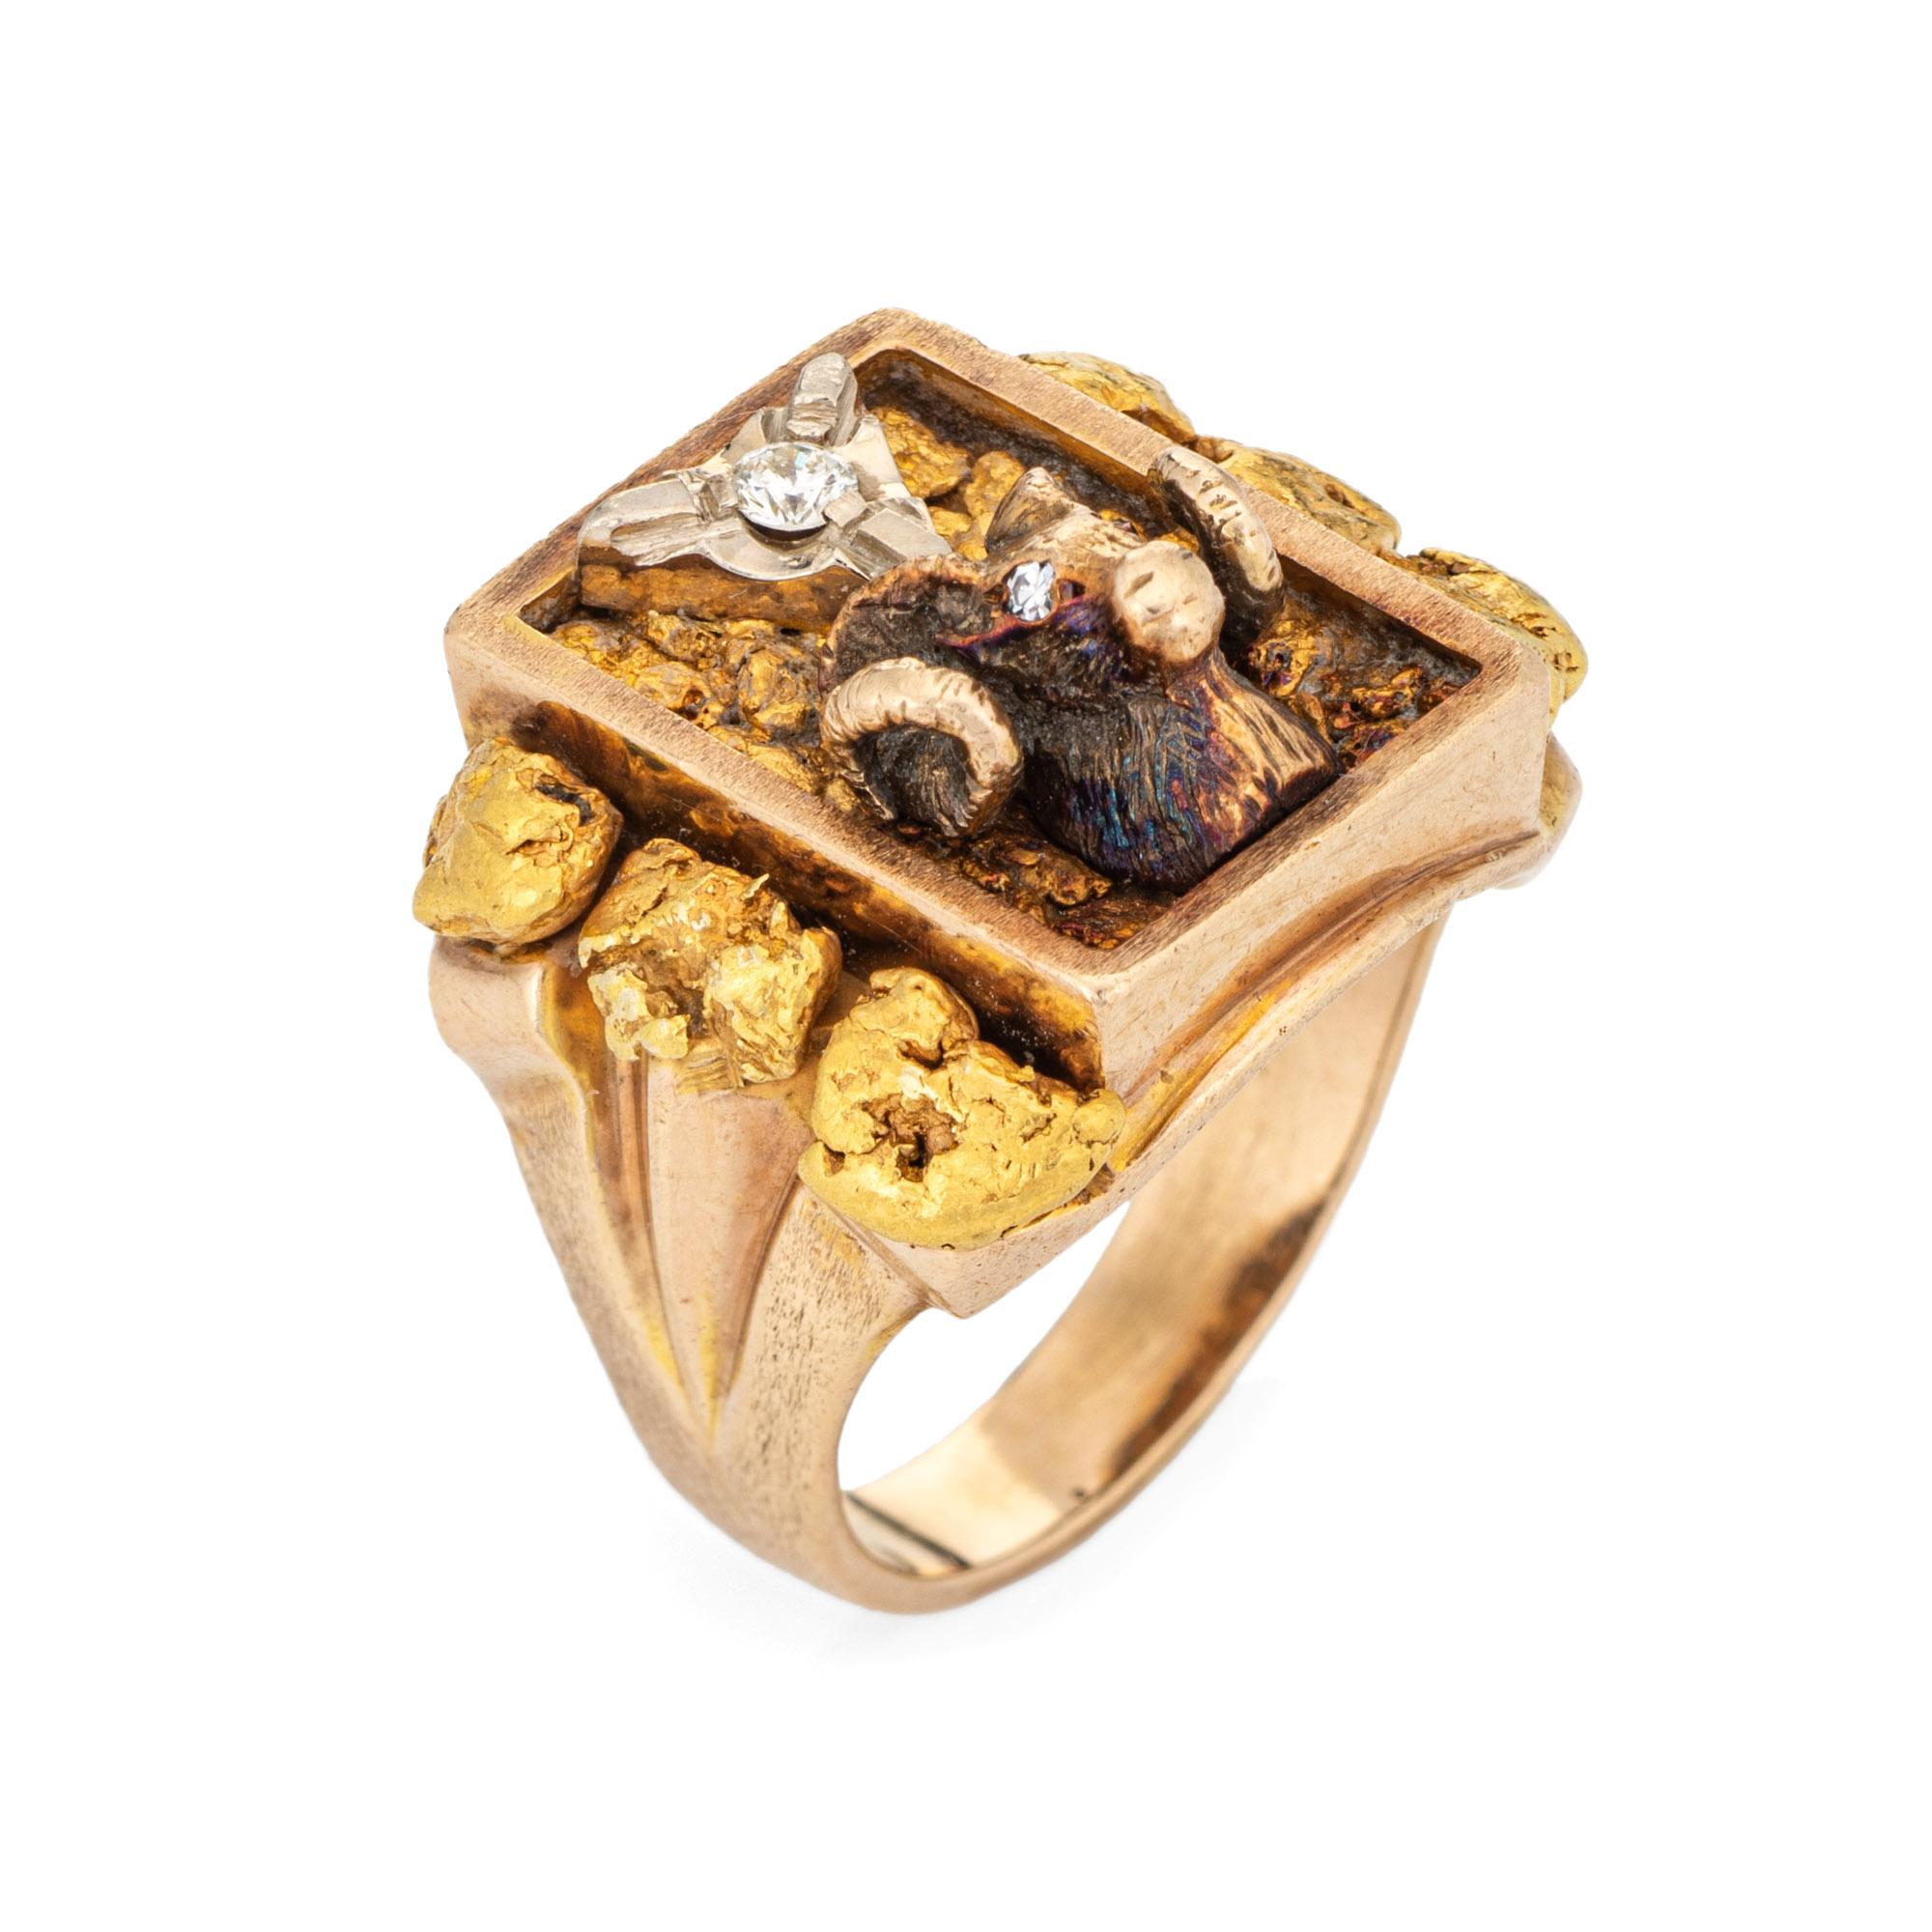 Finely detailed vintage natural gold nugget Rams head ring (circa 1960s to 1970s) crafted in 10 karat yellow gold (22k to 24k gold nuggets). 

One estimated 0.10 carat round brilliant cut diamond is estimated at H-I color and SI1 clarity. 

The